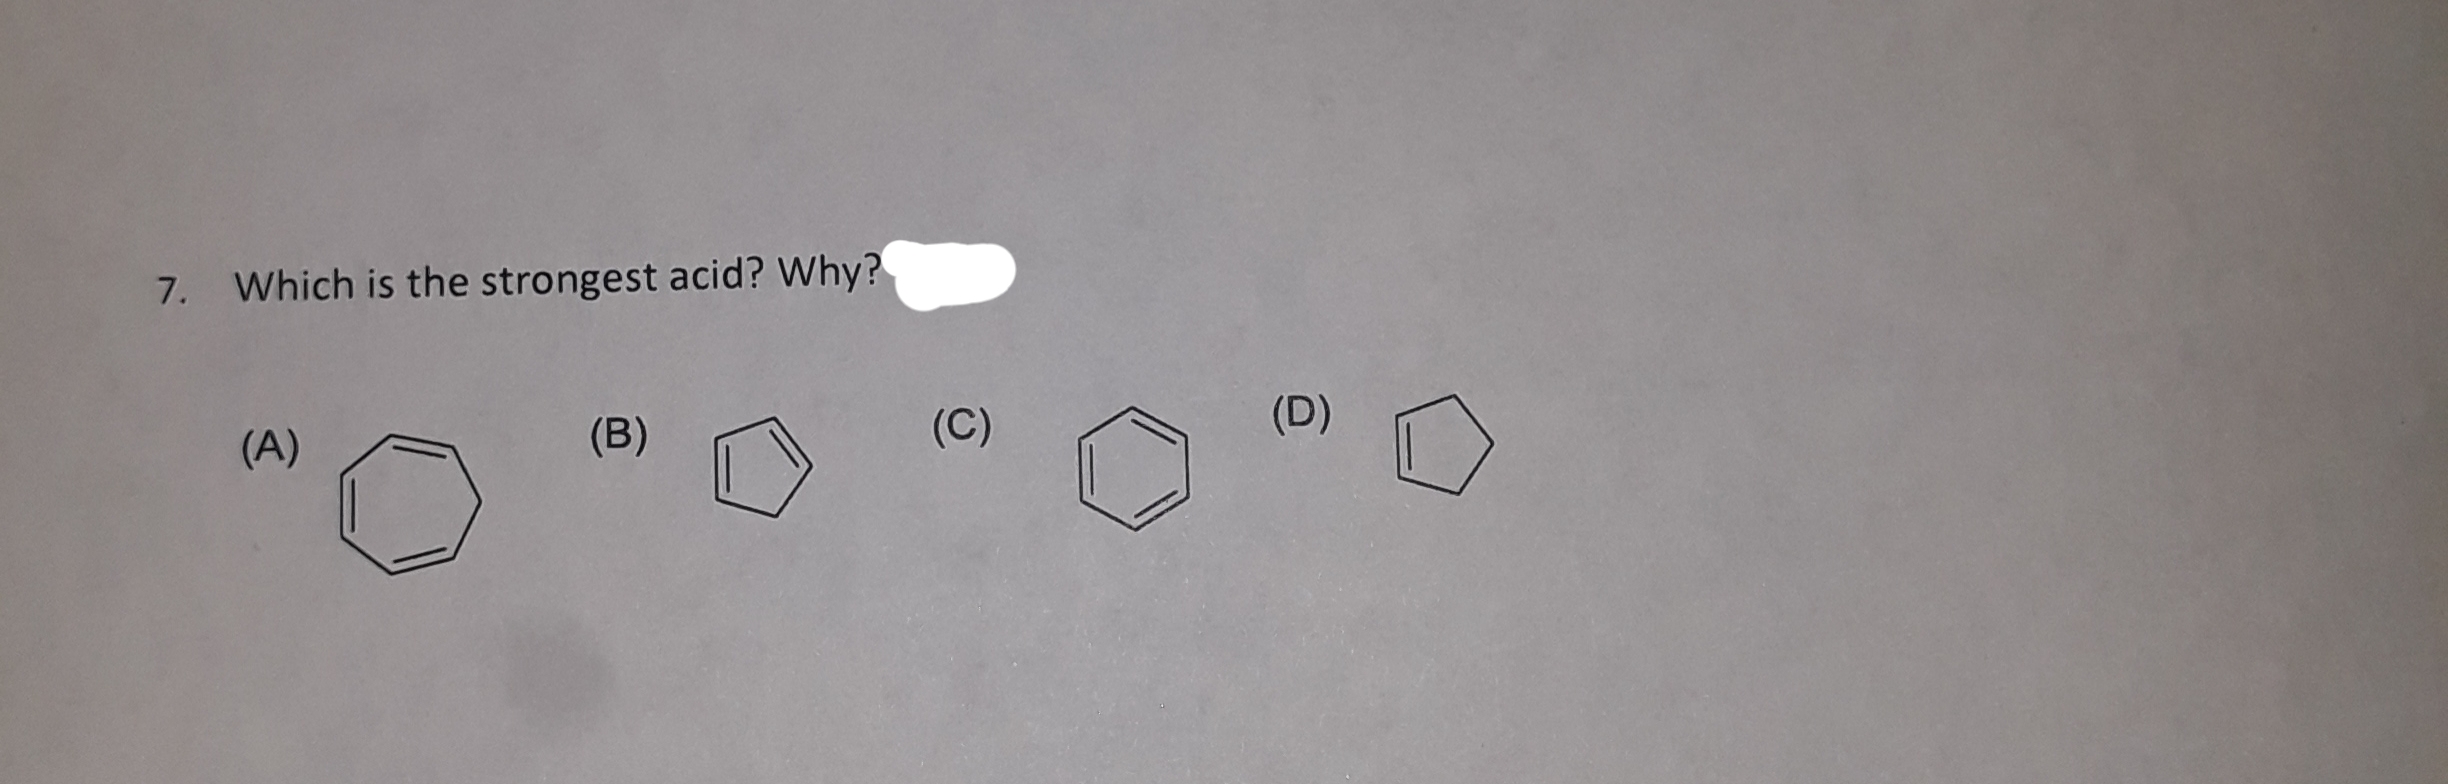 7.
Which is the strongest acid? Why?
(A)
(B)
(C)
(D)
